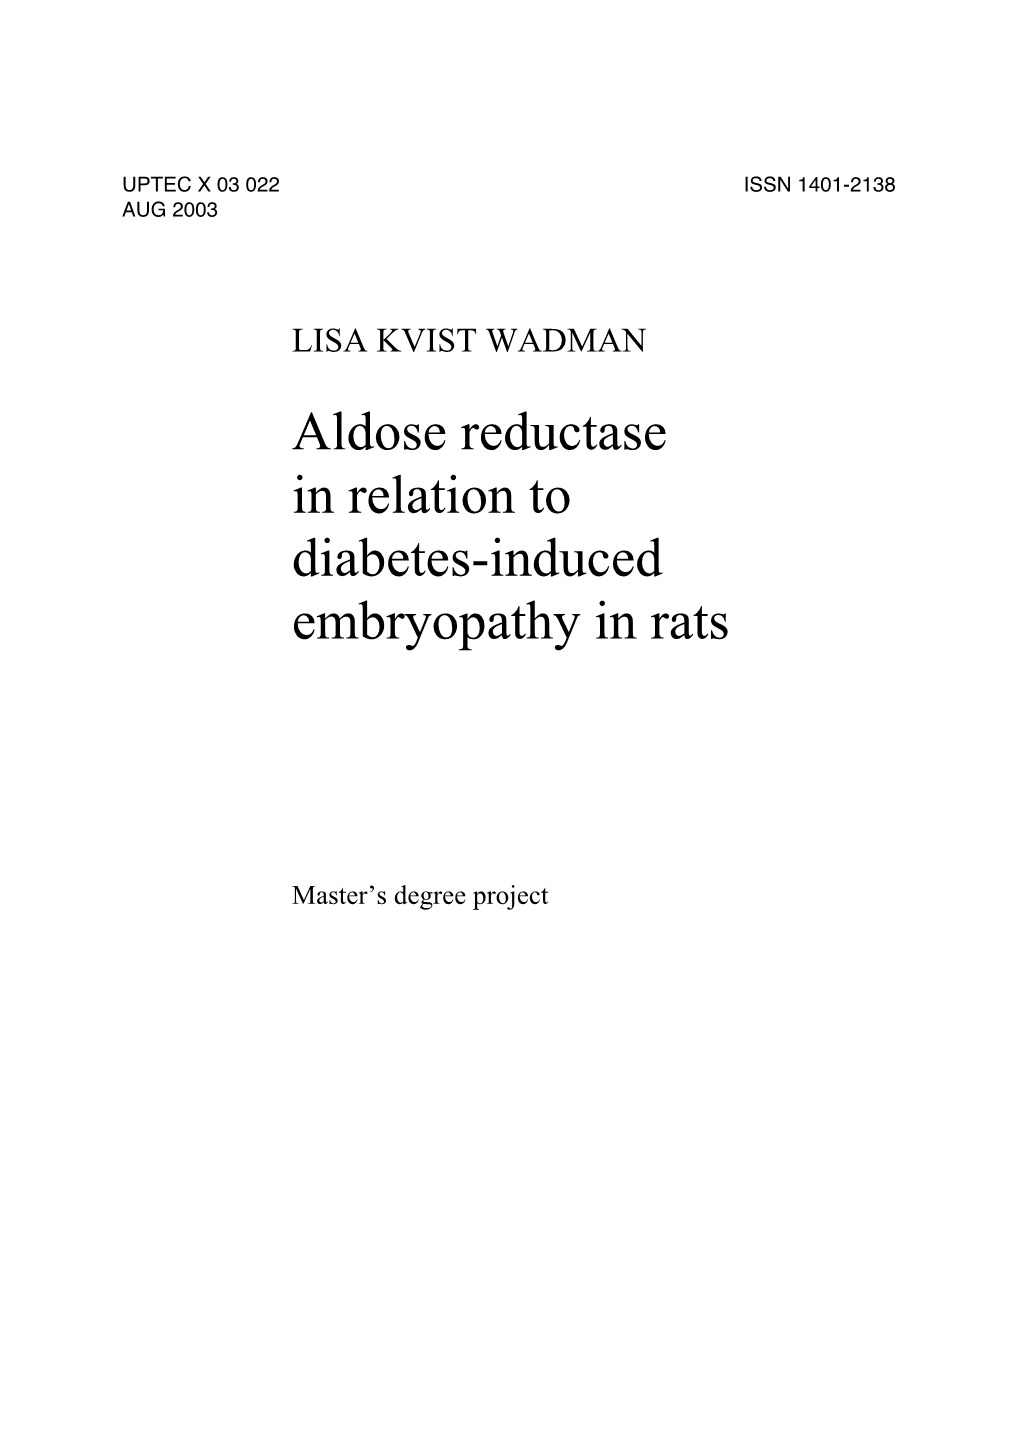 Aldose Reductase in Relation to Diabetes-Induced Embryopathy in Rats